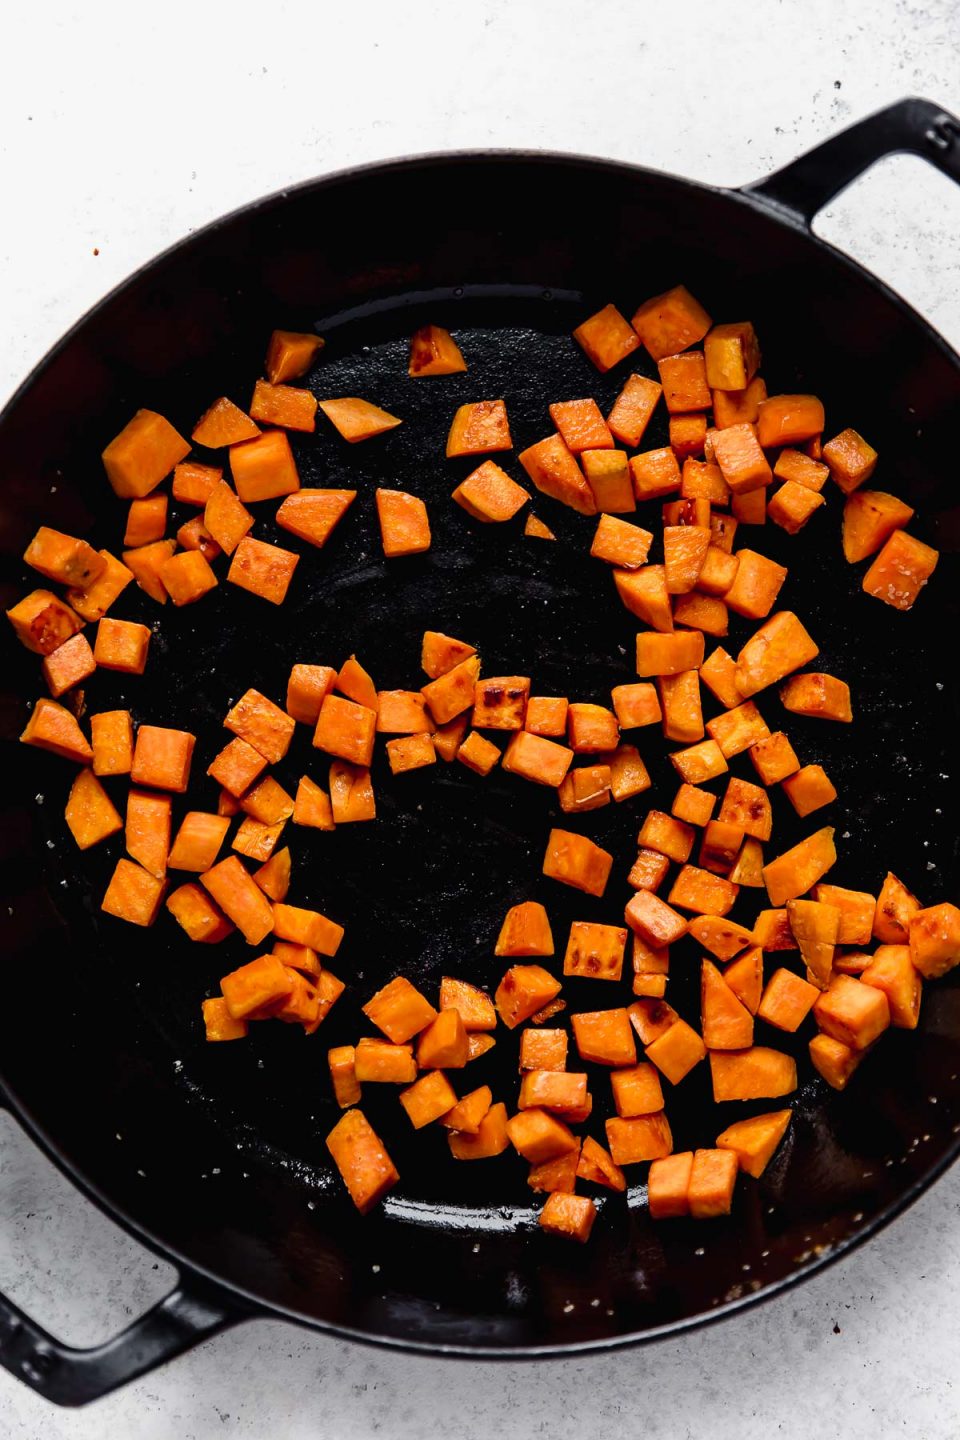 How to make chorizo and potato tacos - Step 1: Sweet Potatoes browning in a large skillet atop a white background.